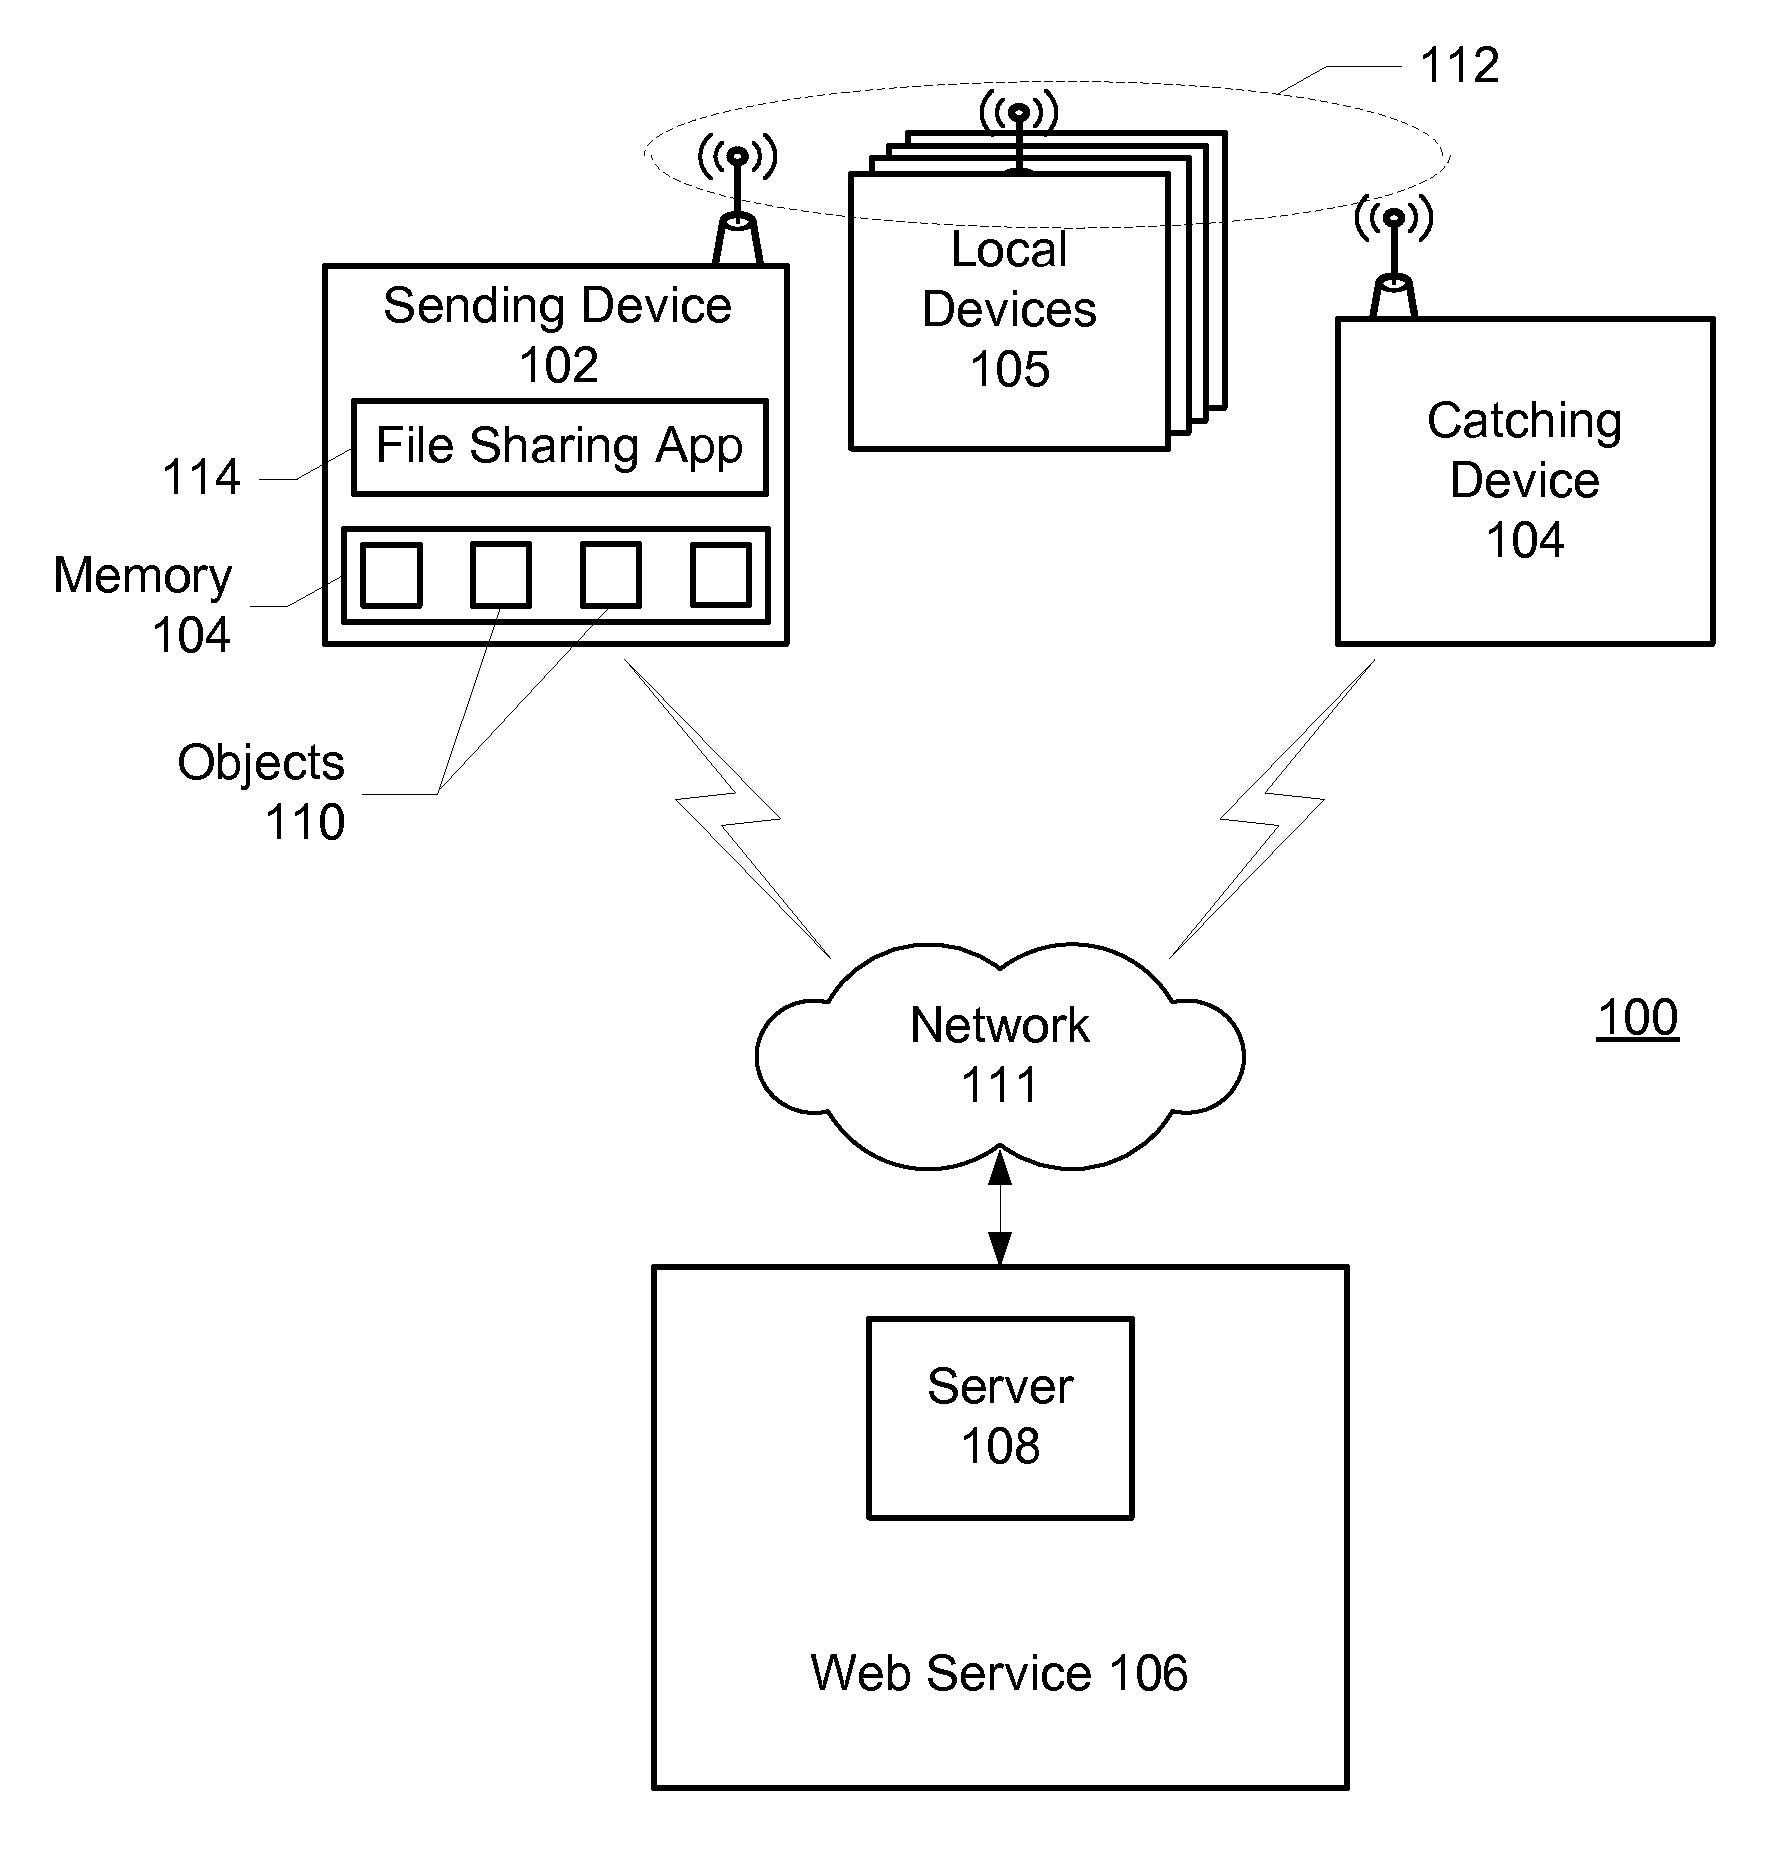 File sharing between devices